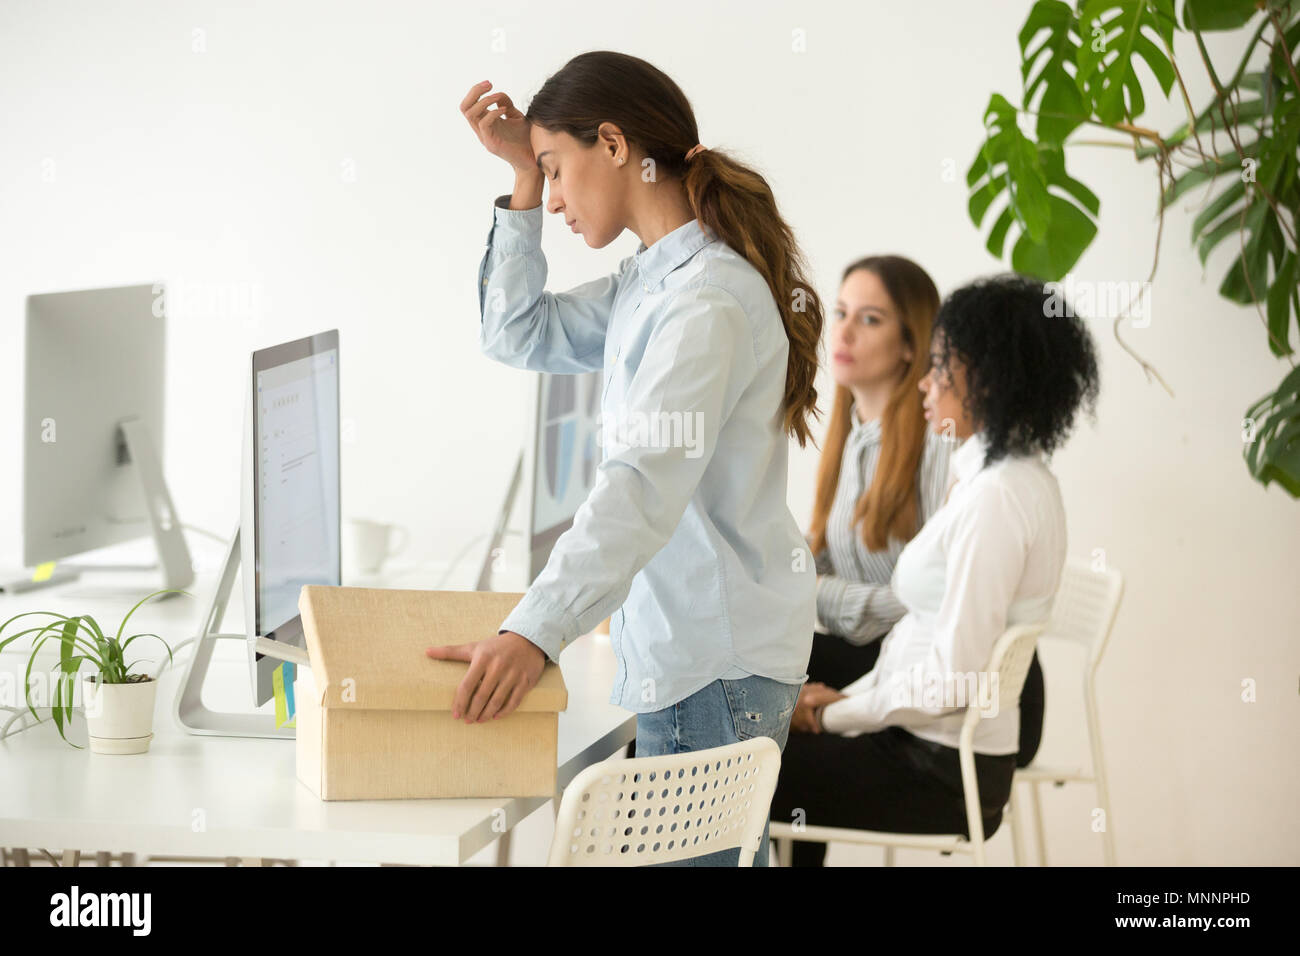 Upset fired dismissed young woman employee packing box leaving w Stock Photo